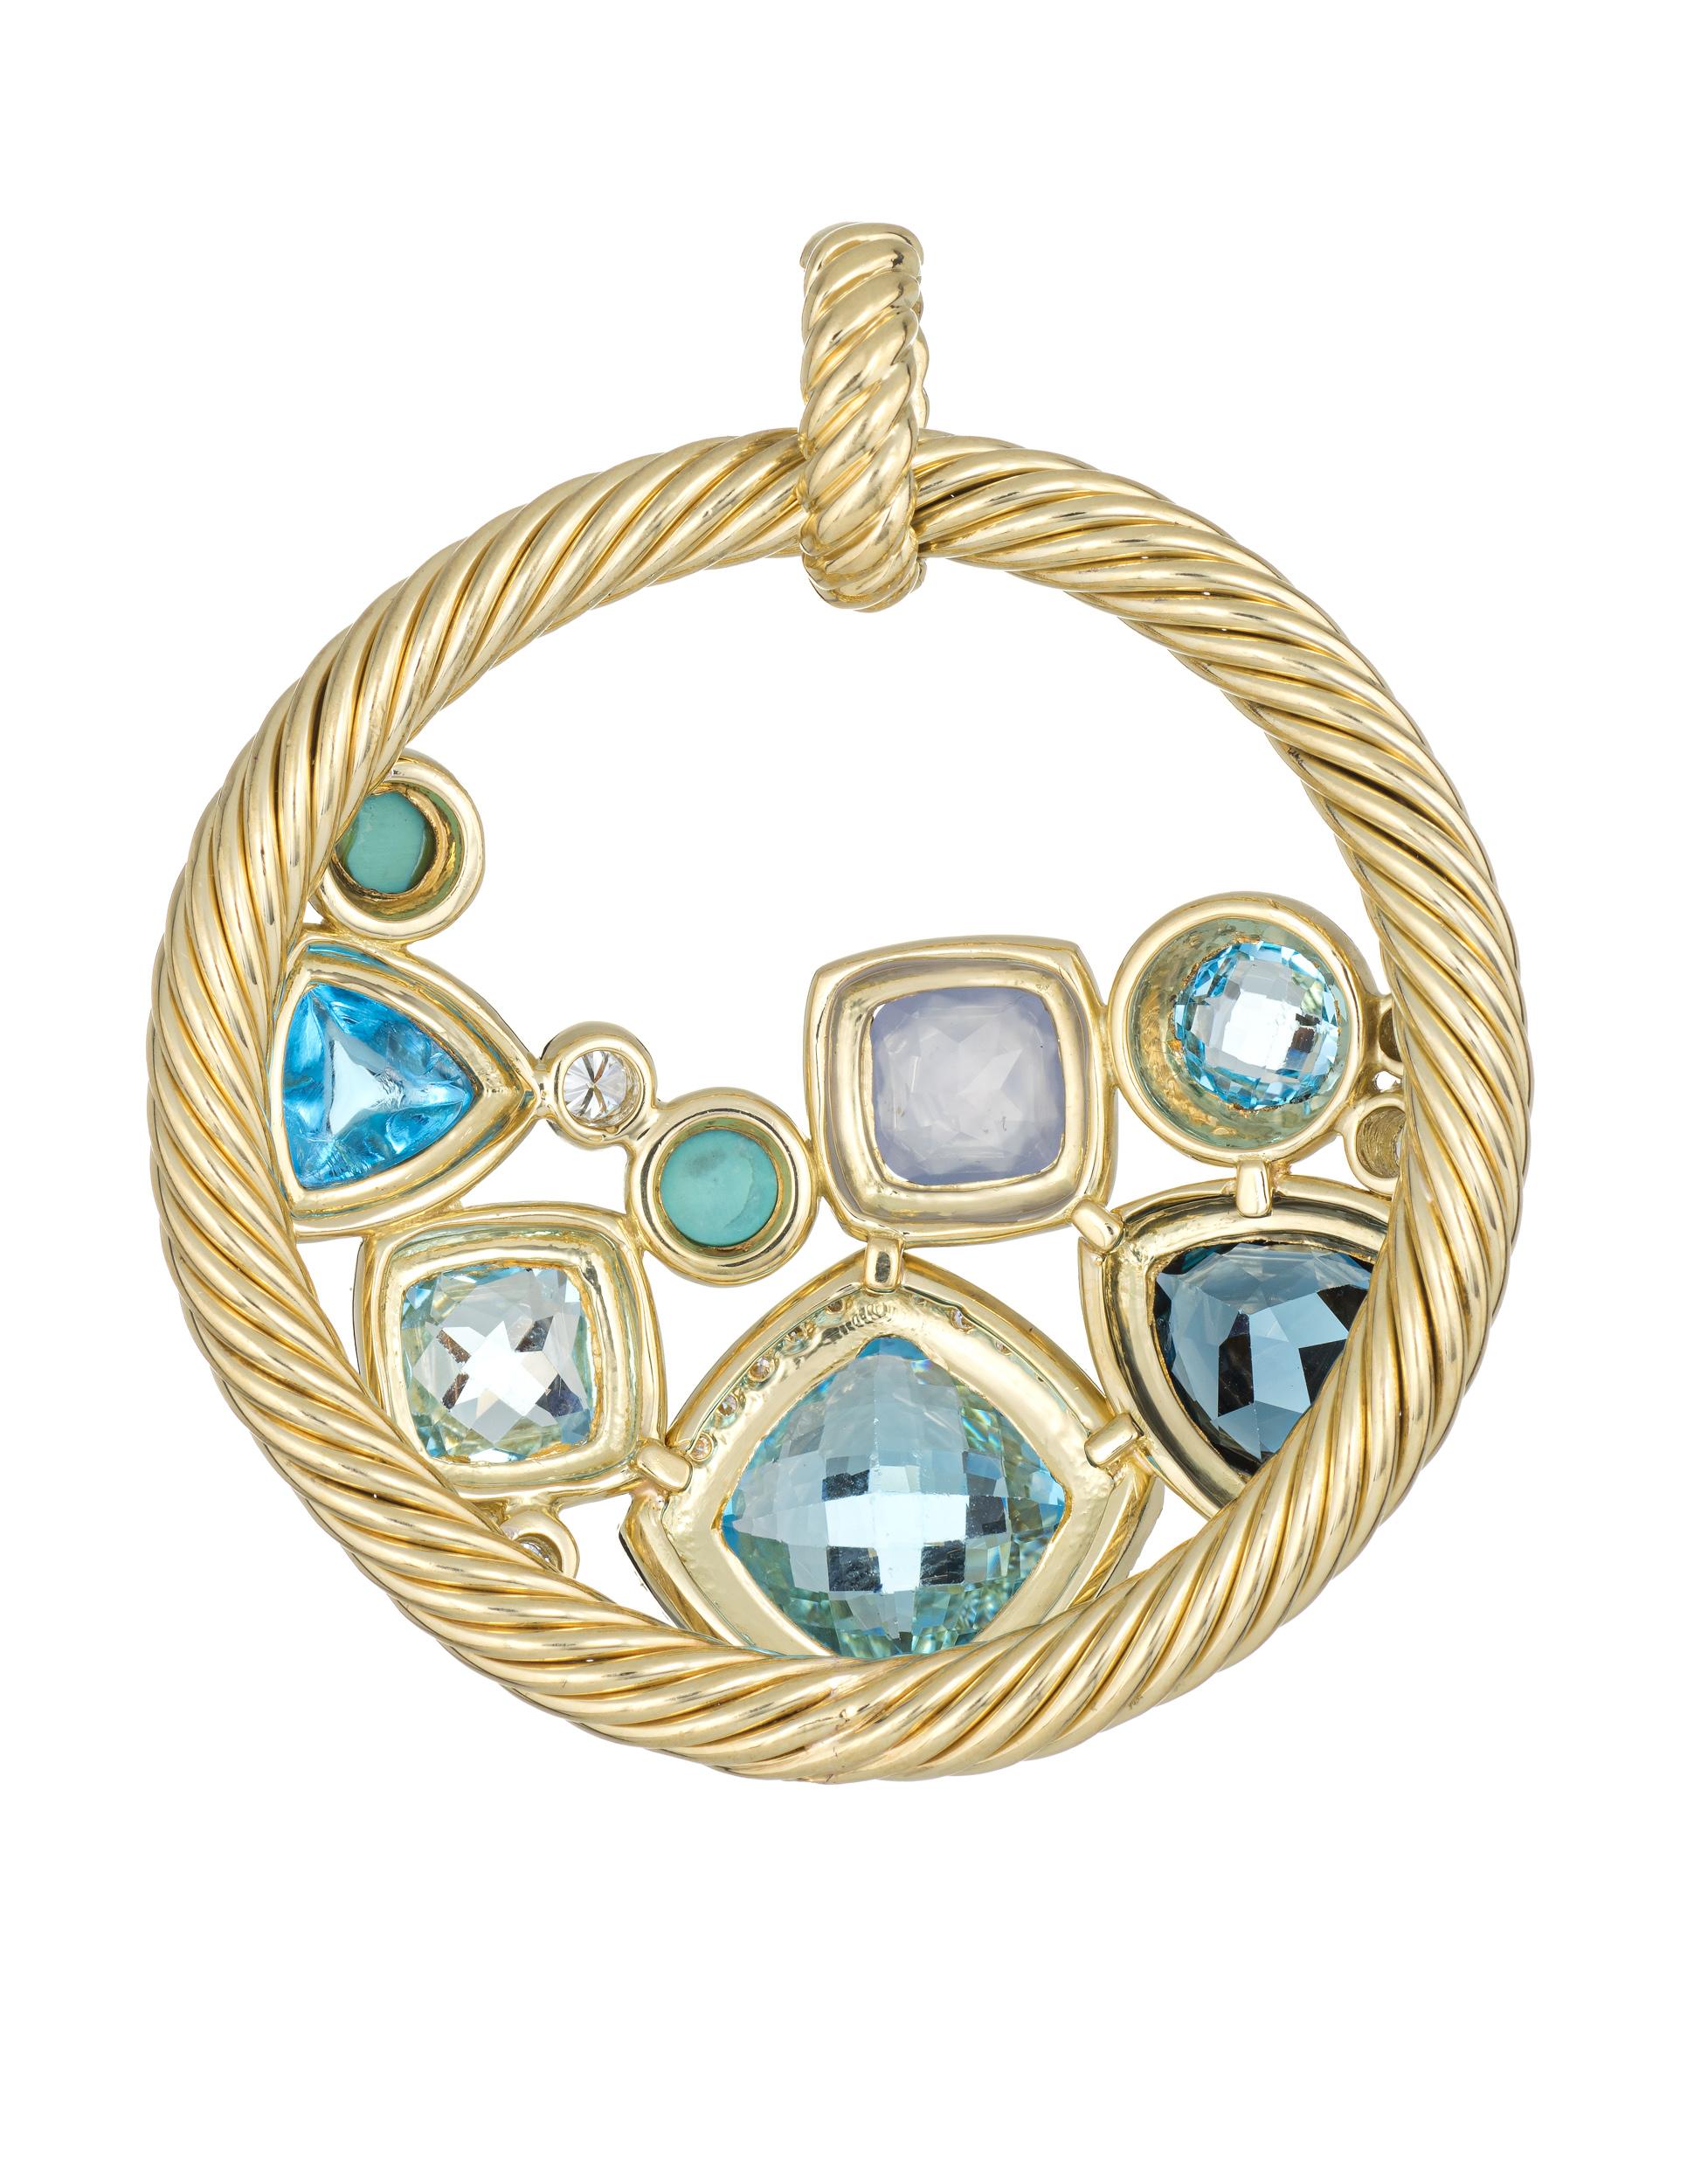 Finely detailed pre-owned David Yurman mosaic pendant crafted in 18 karat yellow gold. 

Diamonds total an estimated 0.50 carats (estimated at H-I color and SI1-I1 clarity). Blue topaz, turquoise, and chalcedony are set into the mount. The gemstones